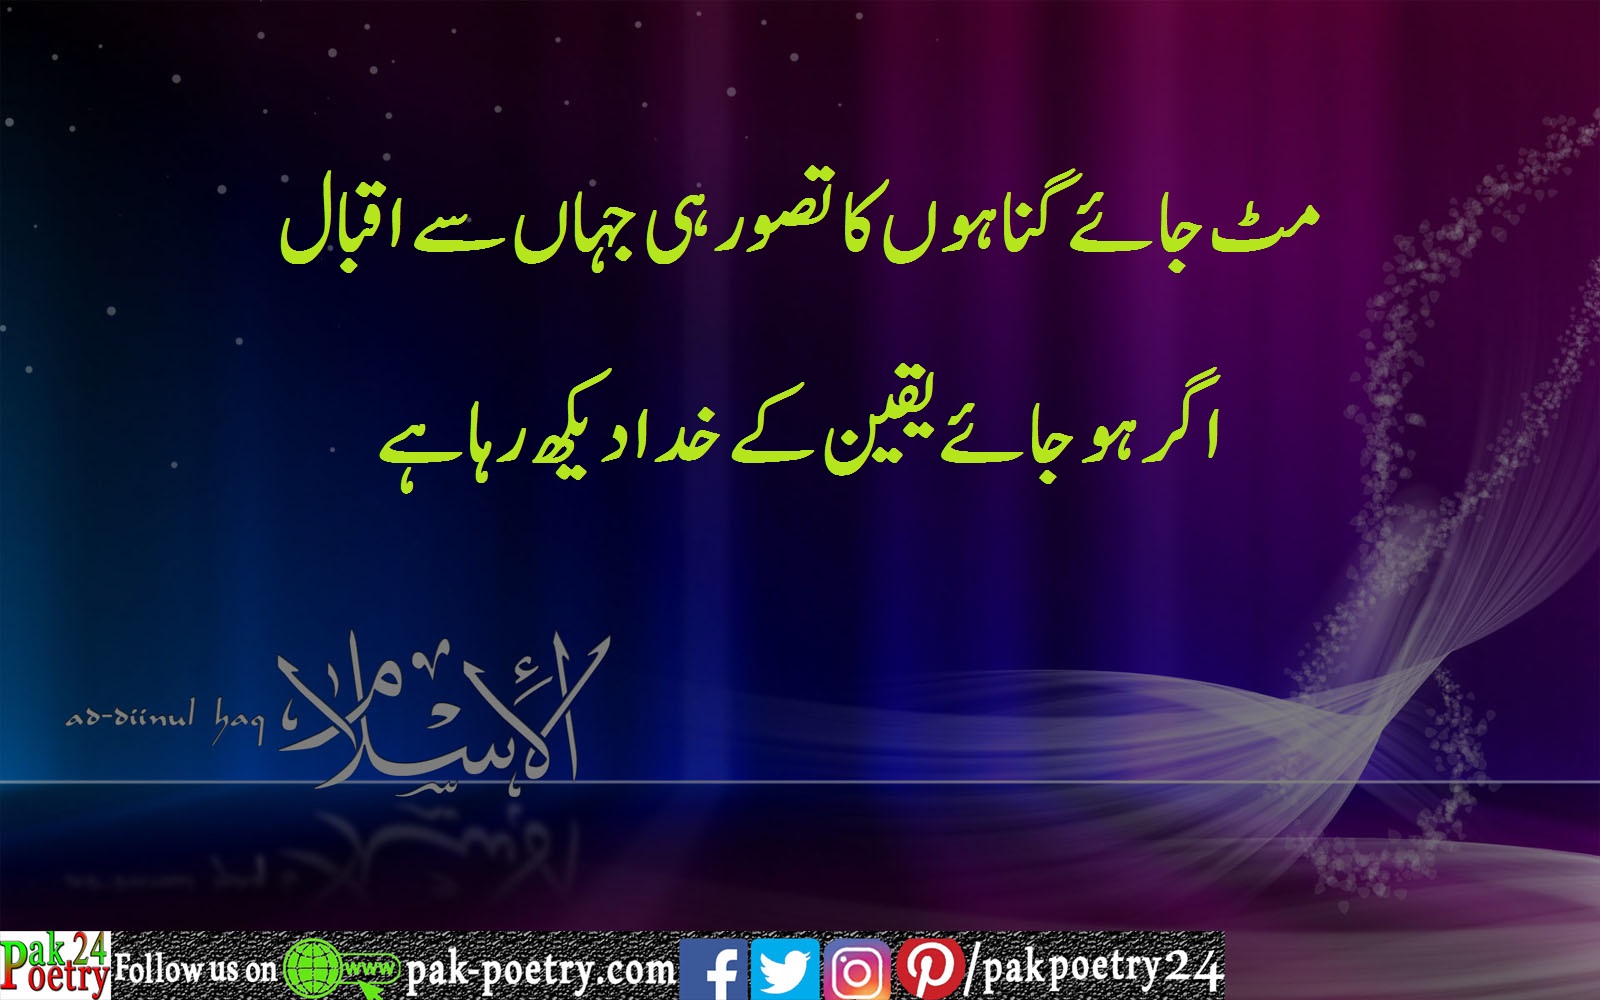 Islamic Poetry in Urdu with Text and Images or Pics | Pak Poetry 24